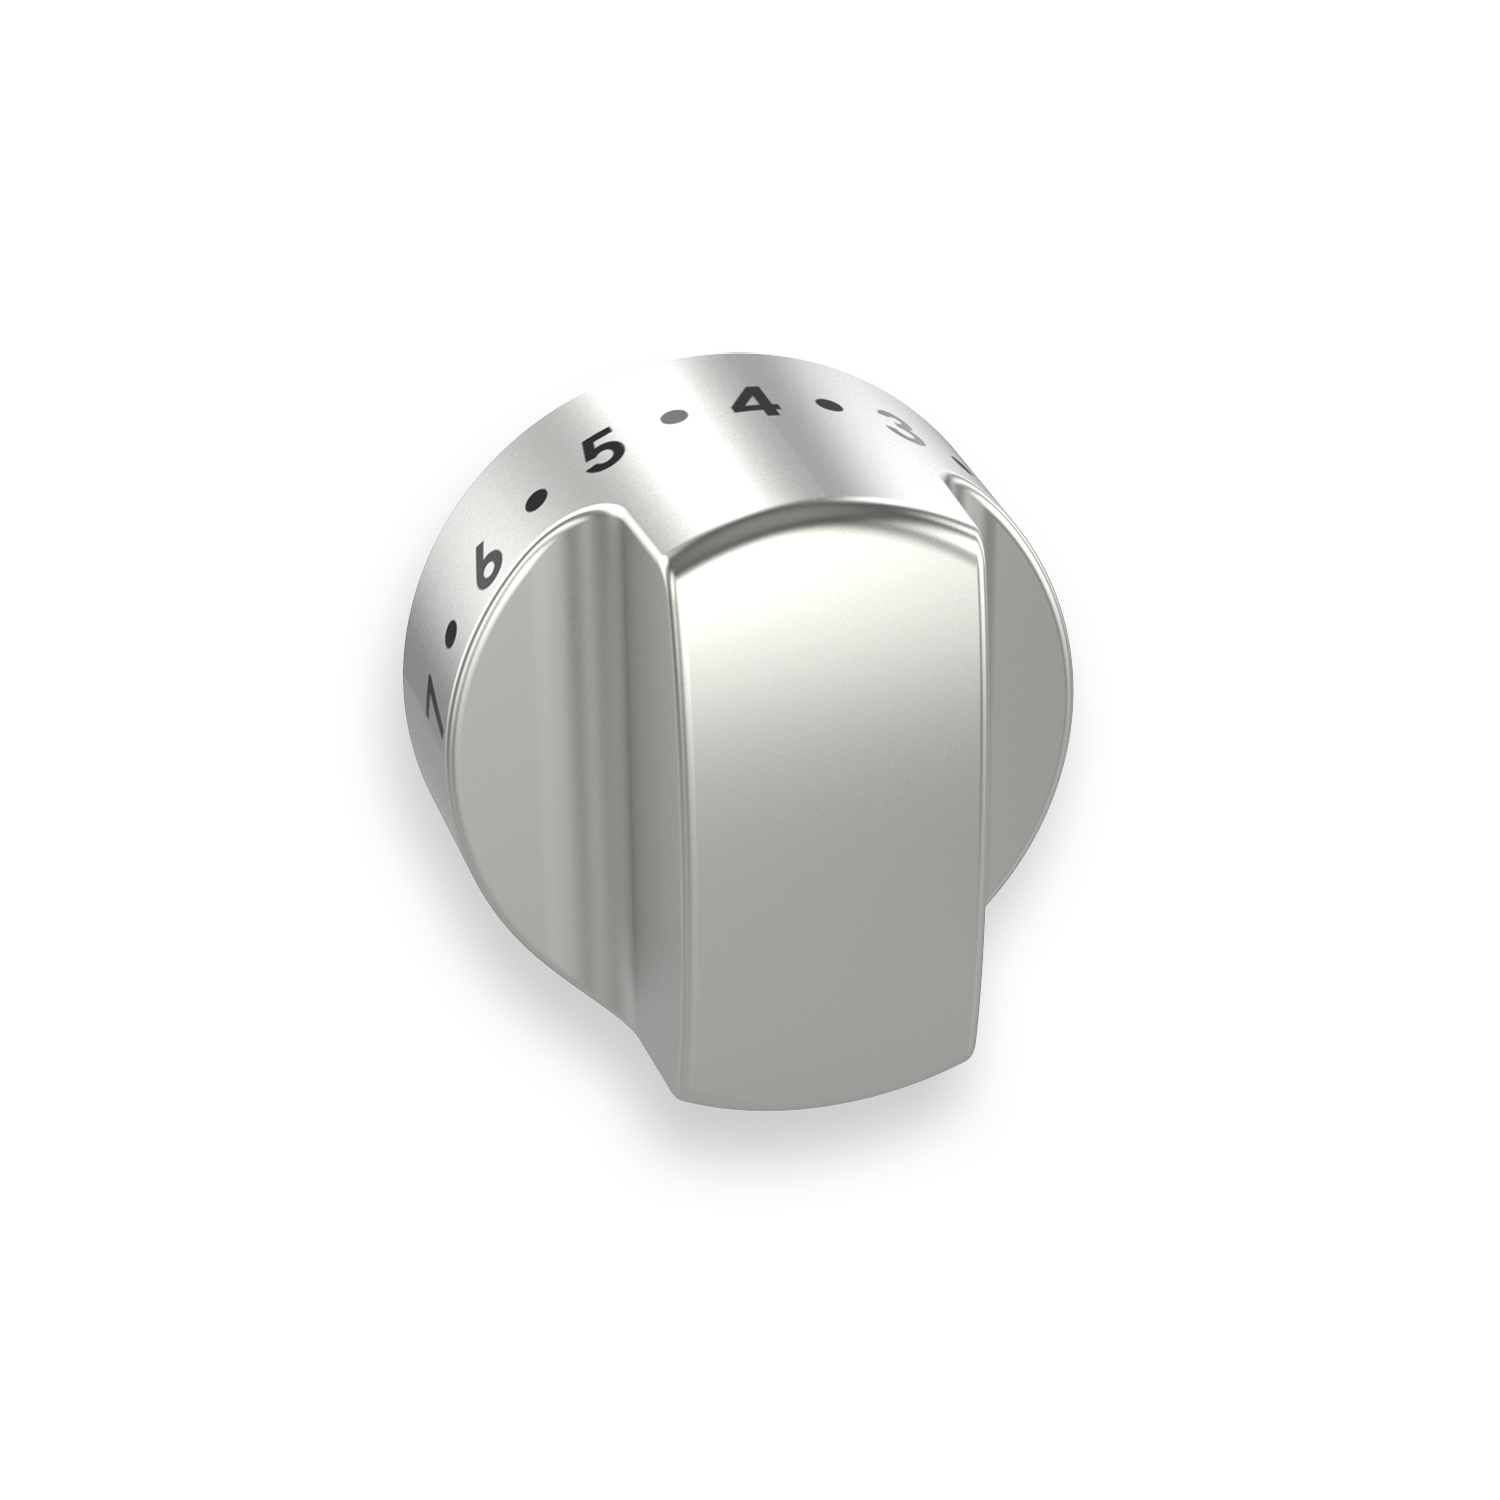 Two Slice Toaster Knob - Brushed Stainless